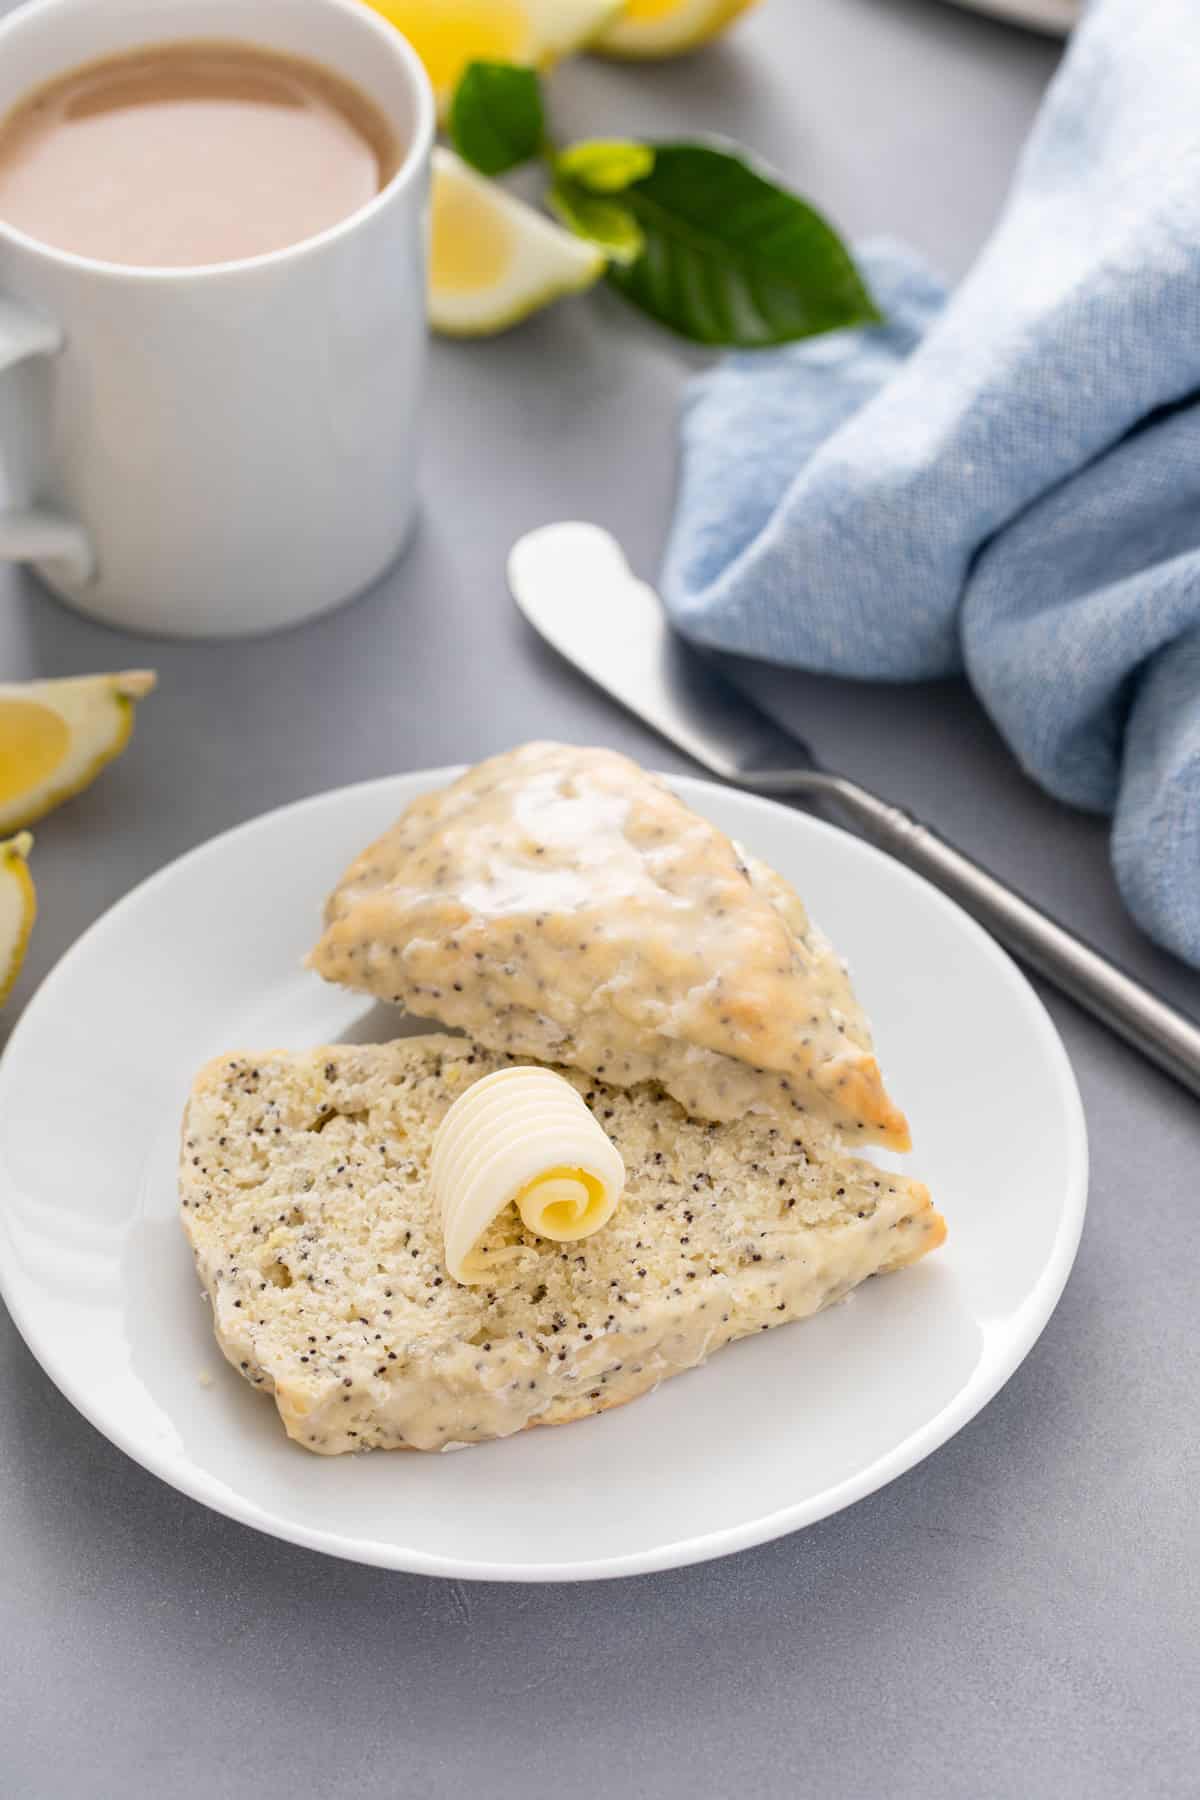 Lemon poppy seed scone sliced in half with a pat of butter on it.